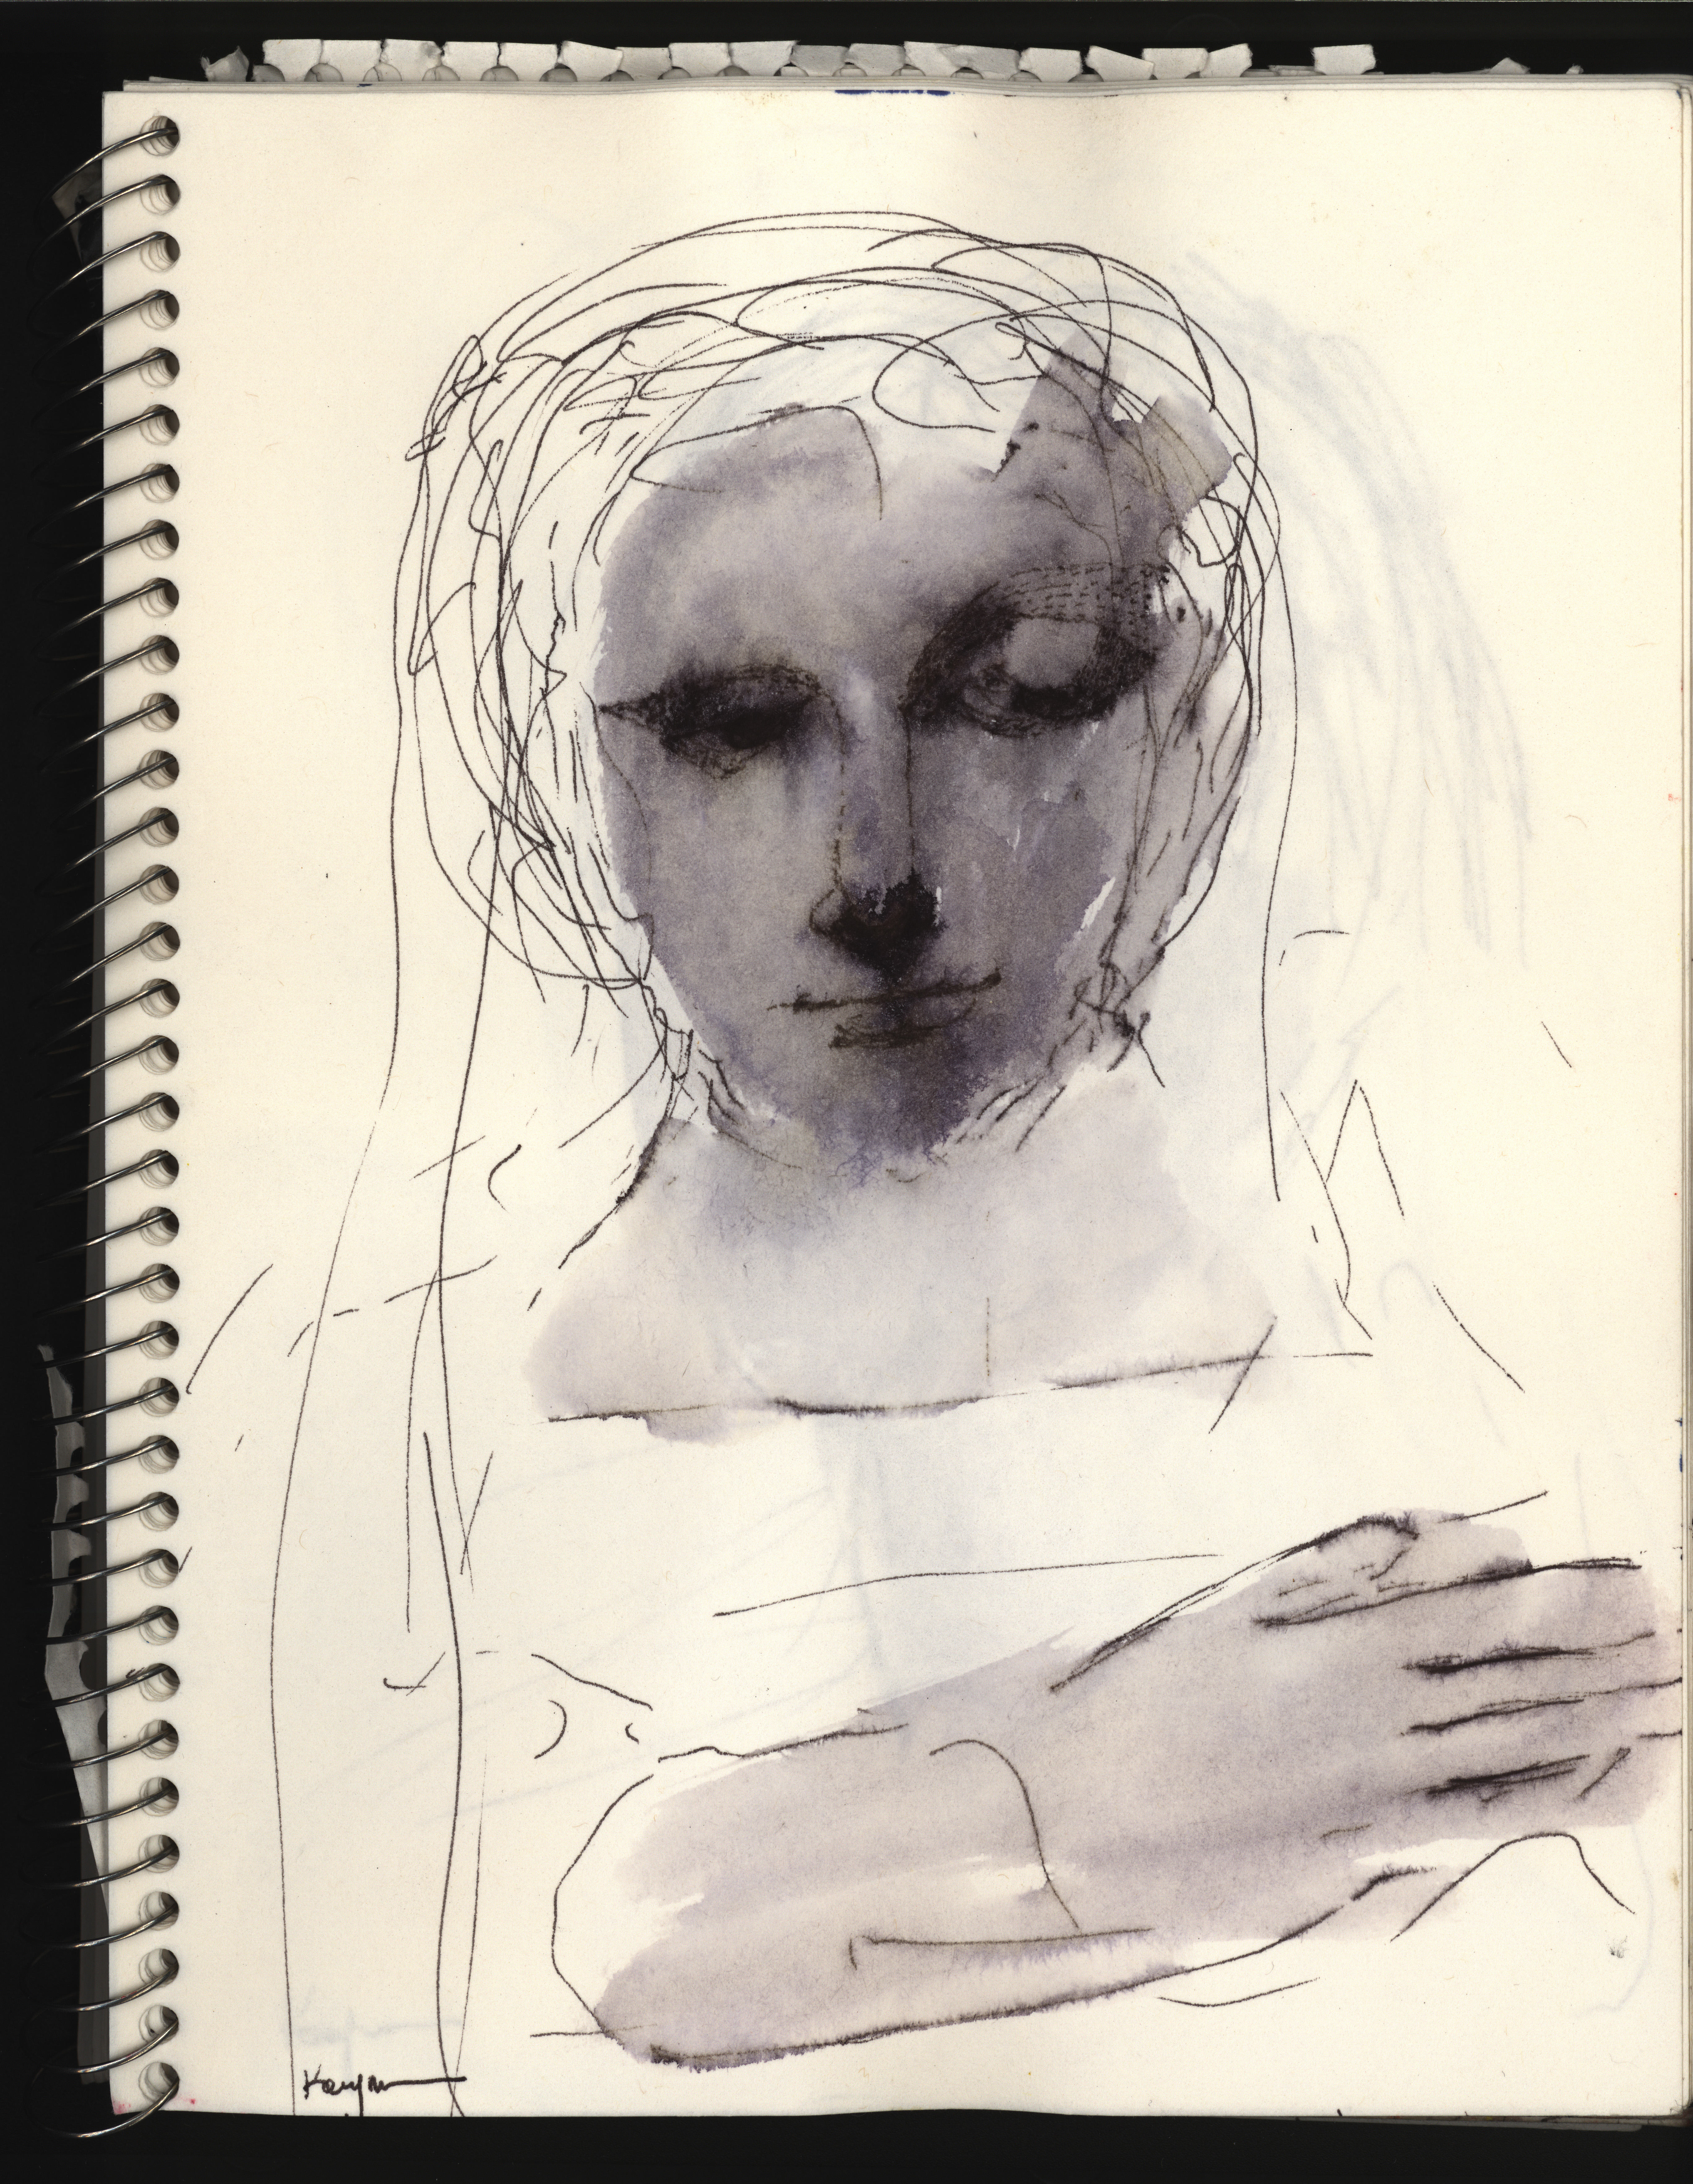 Portrait of a contemplative woman, pen and ink, from Alan Kaufman’s sketchbook, undated.